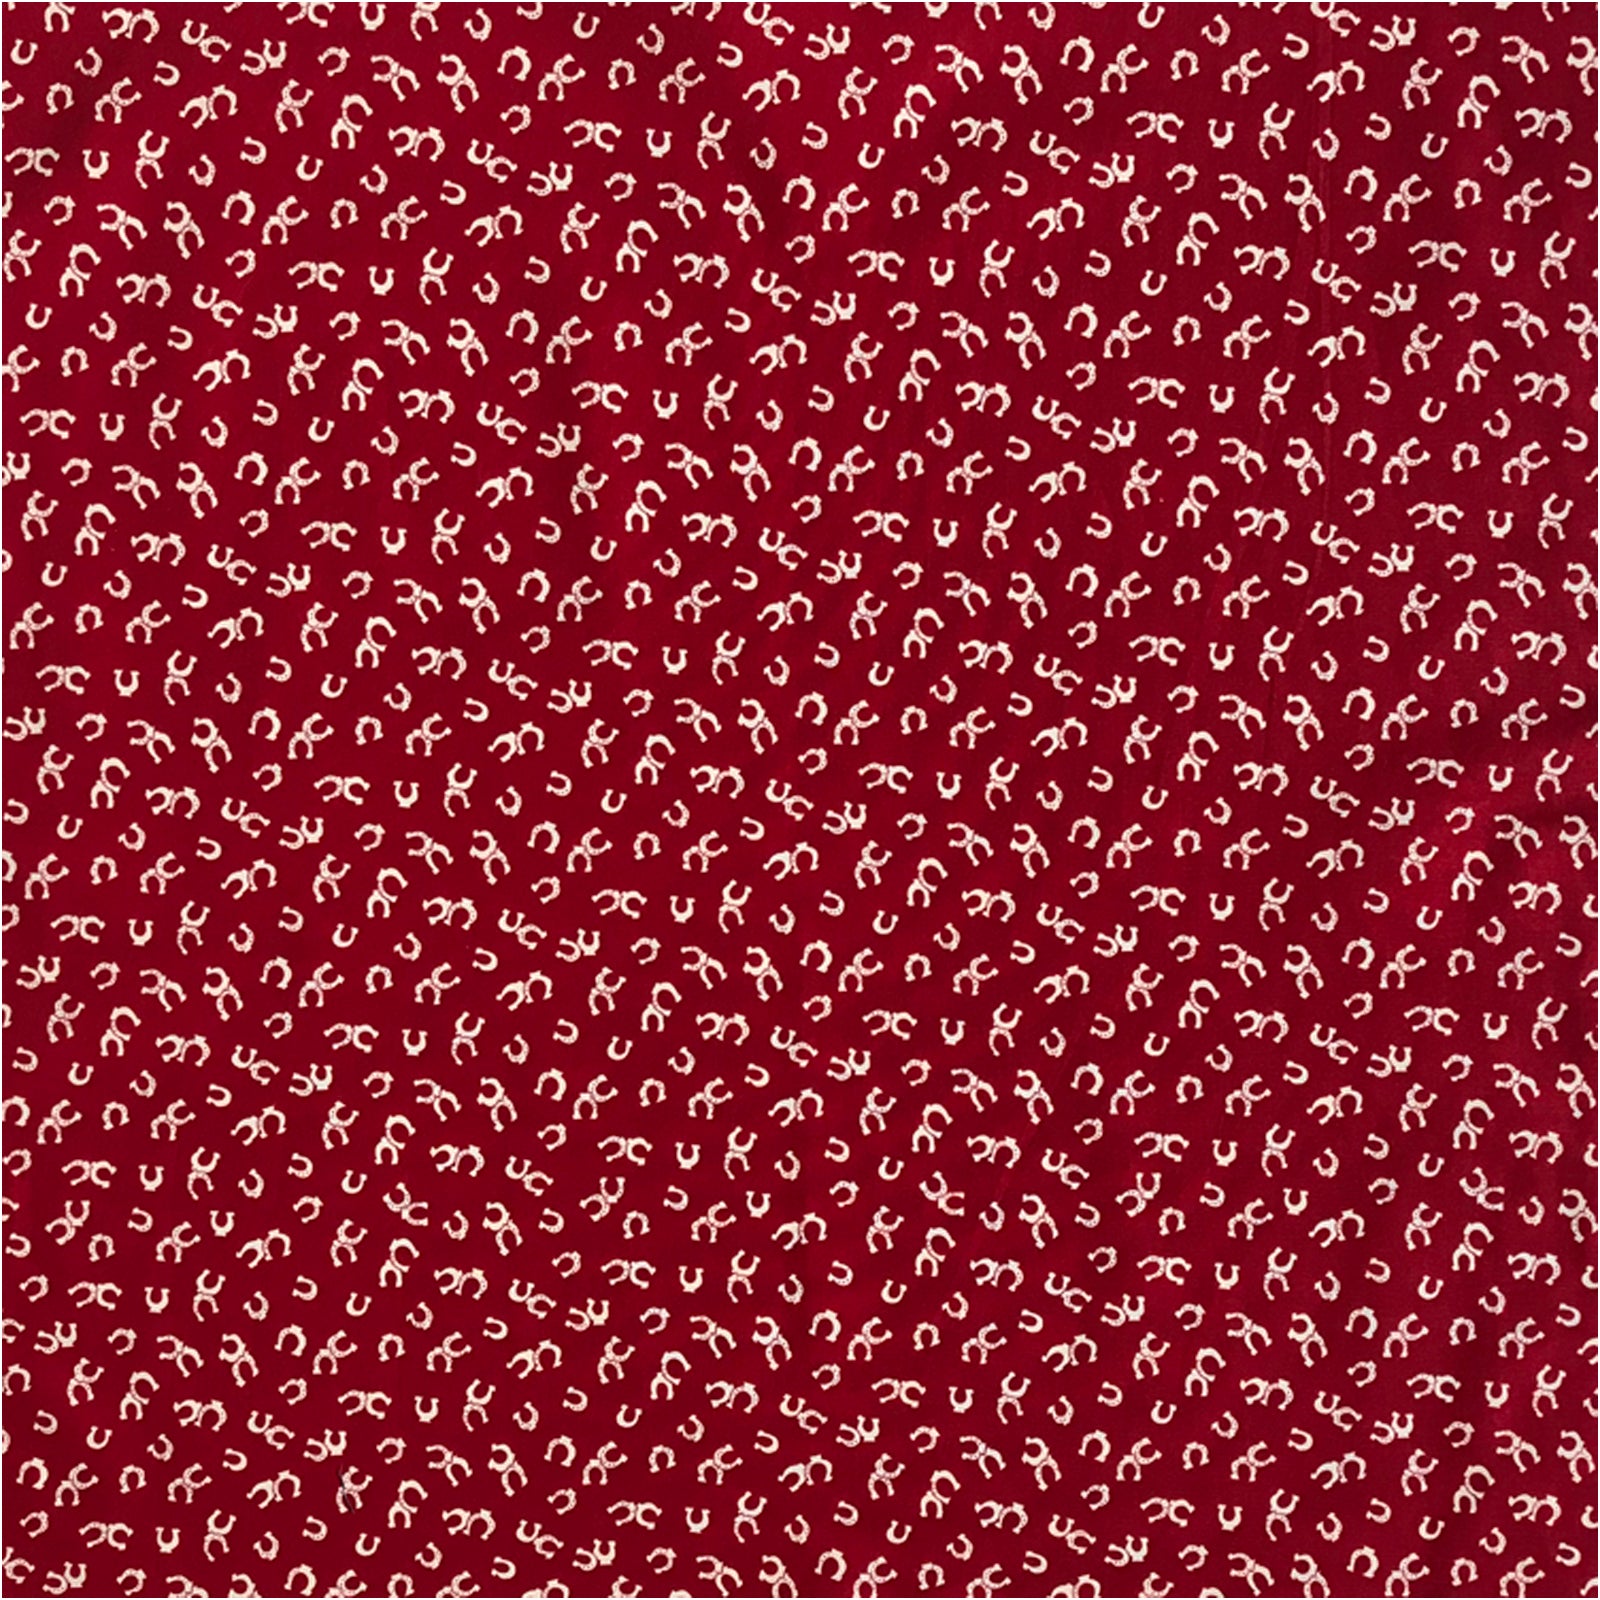 Lucky Horseshoes Western Cotton Bandana in Red - Rockmount